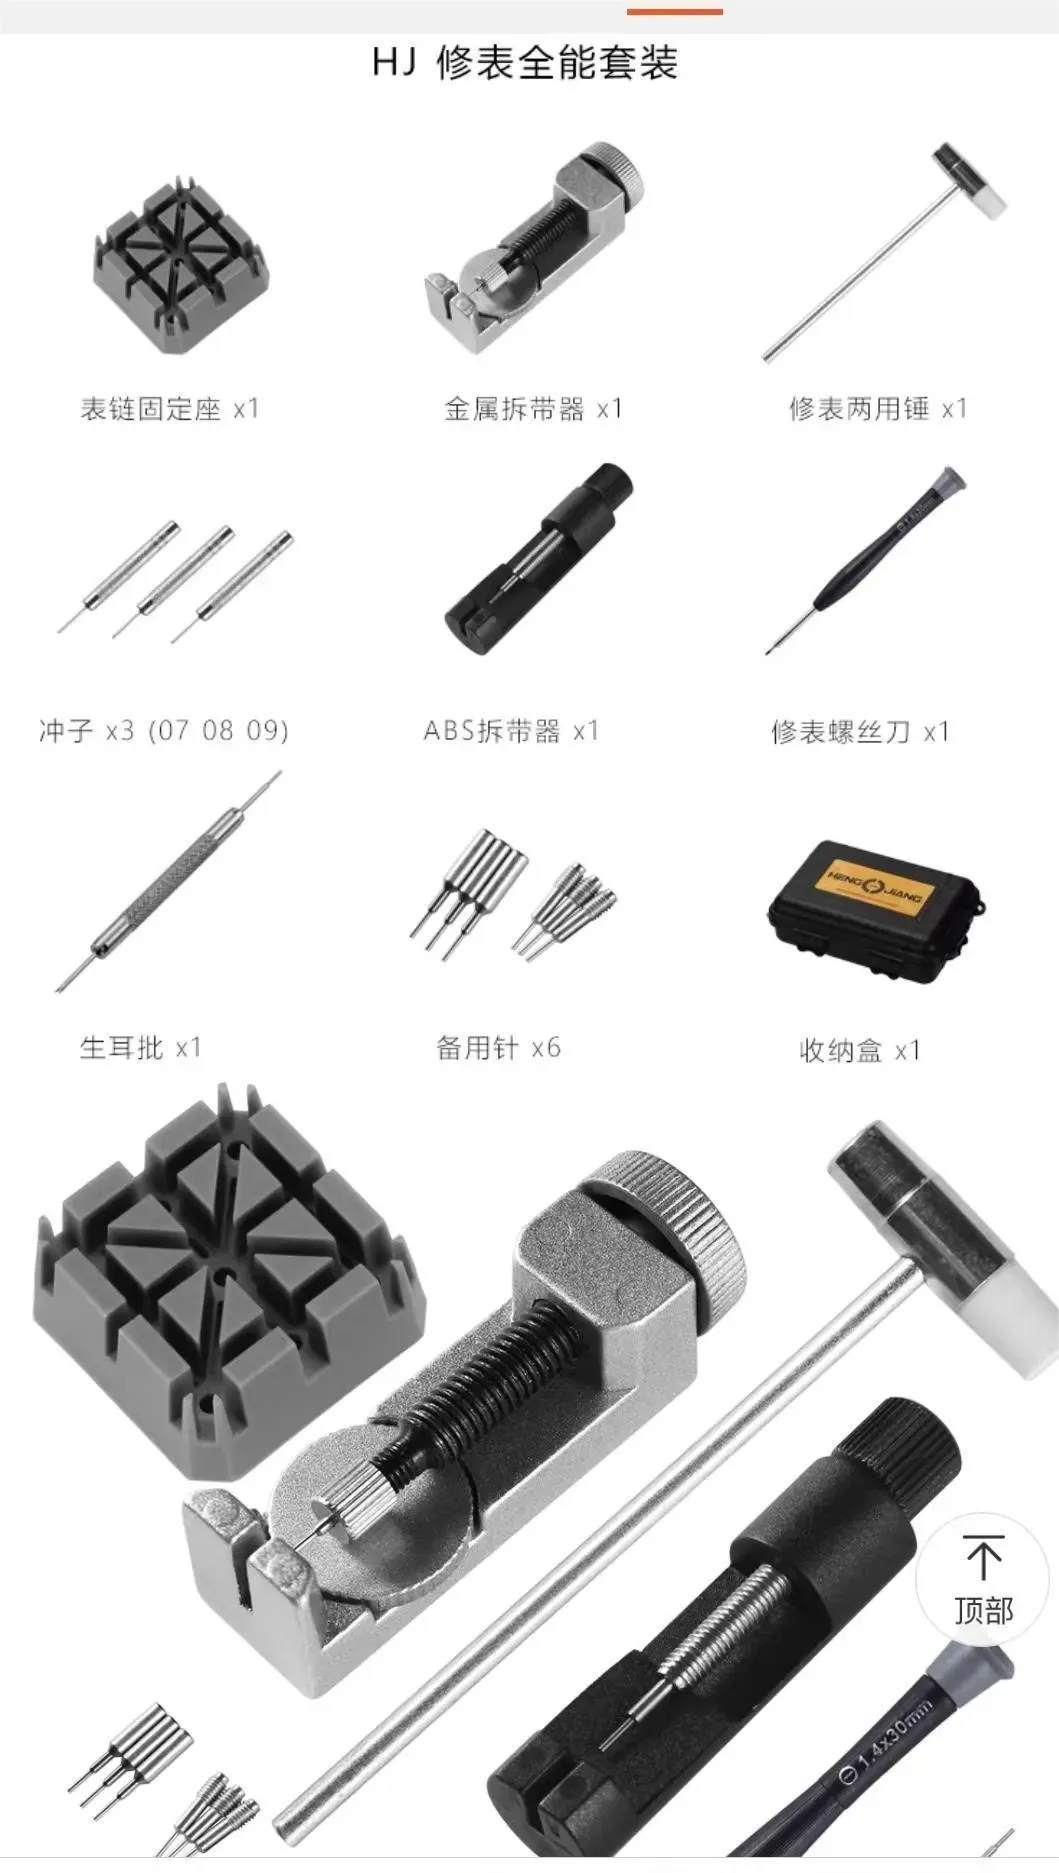 The classical professional watch repair tools are cheap and nice sell good watch tools